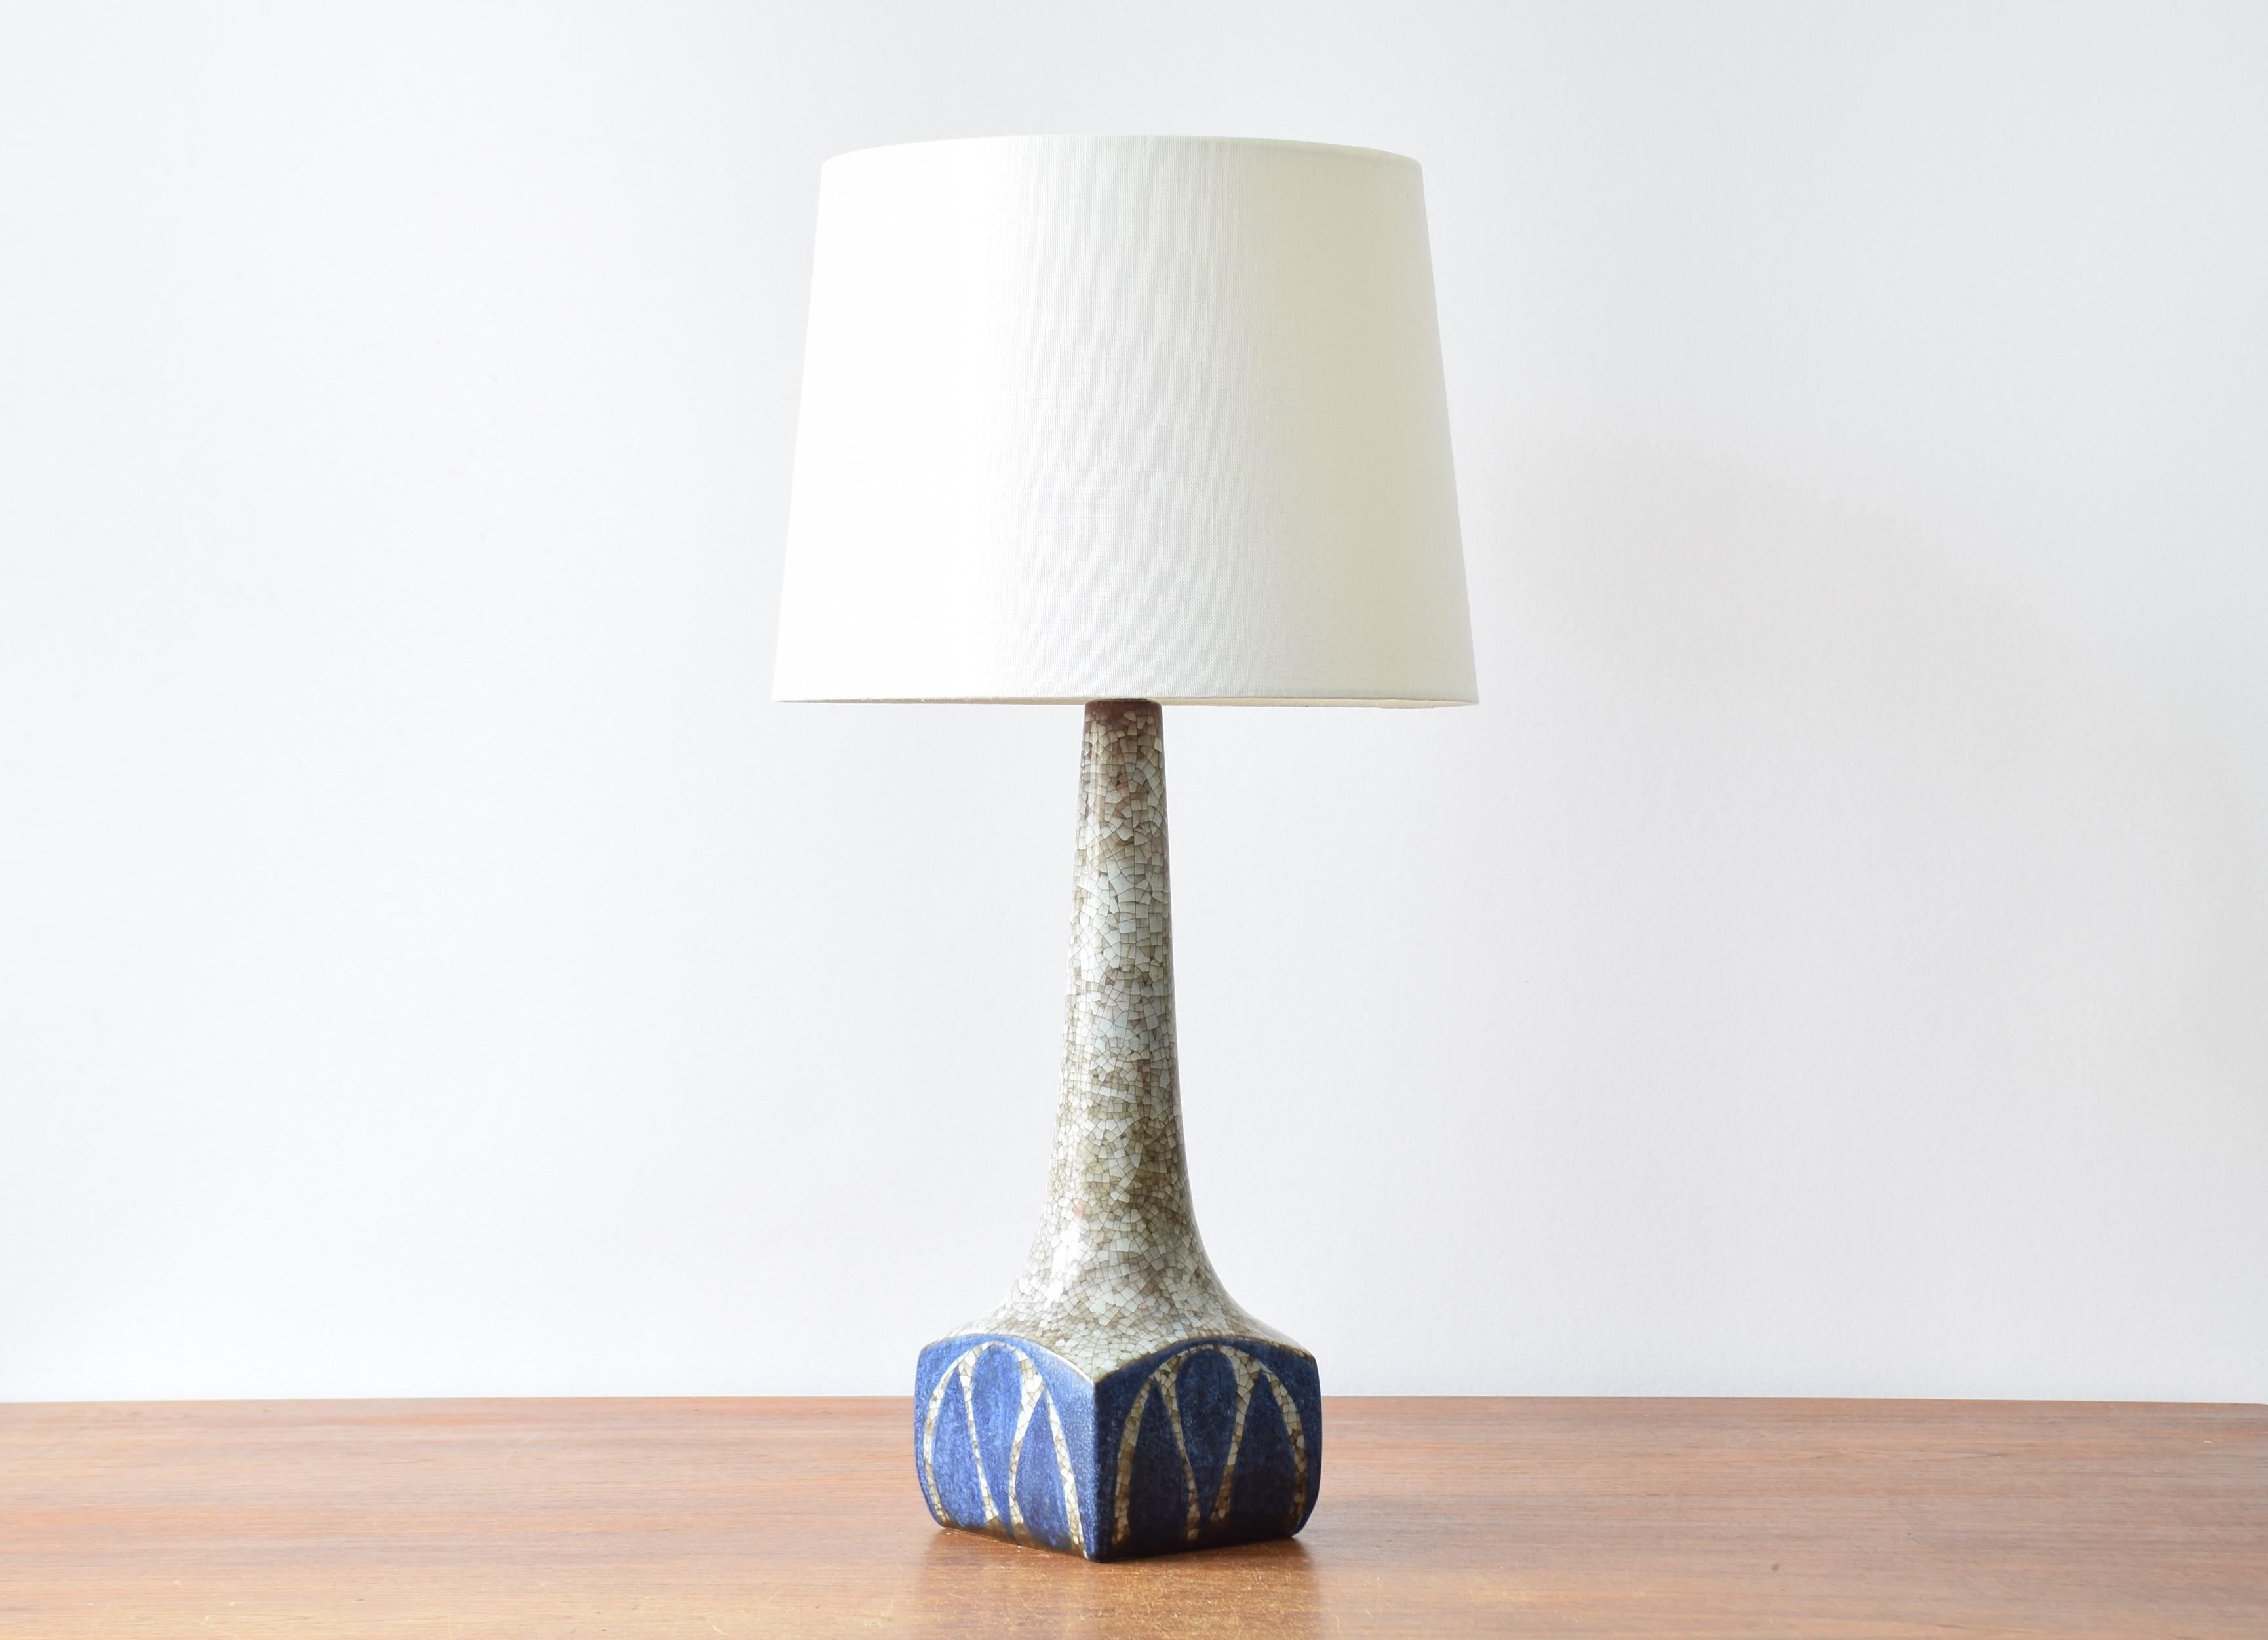 Mid-20th Century Danish Tall Ceramic Table Lamp Blue Persia Glaze, Marianne Starck for MA&S 1960s For Sale